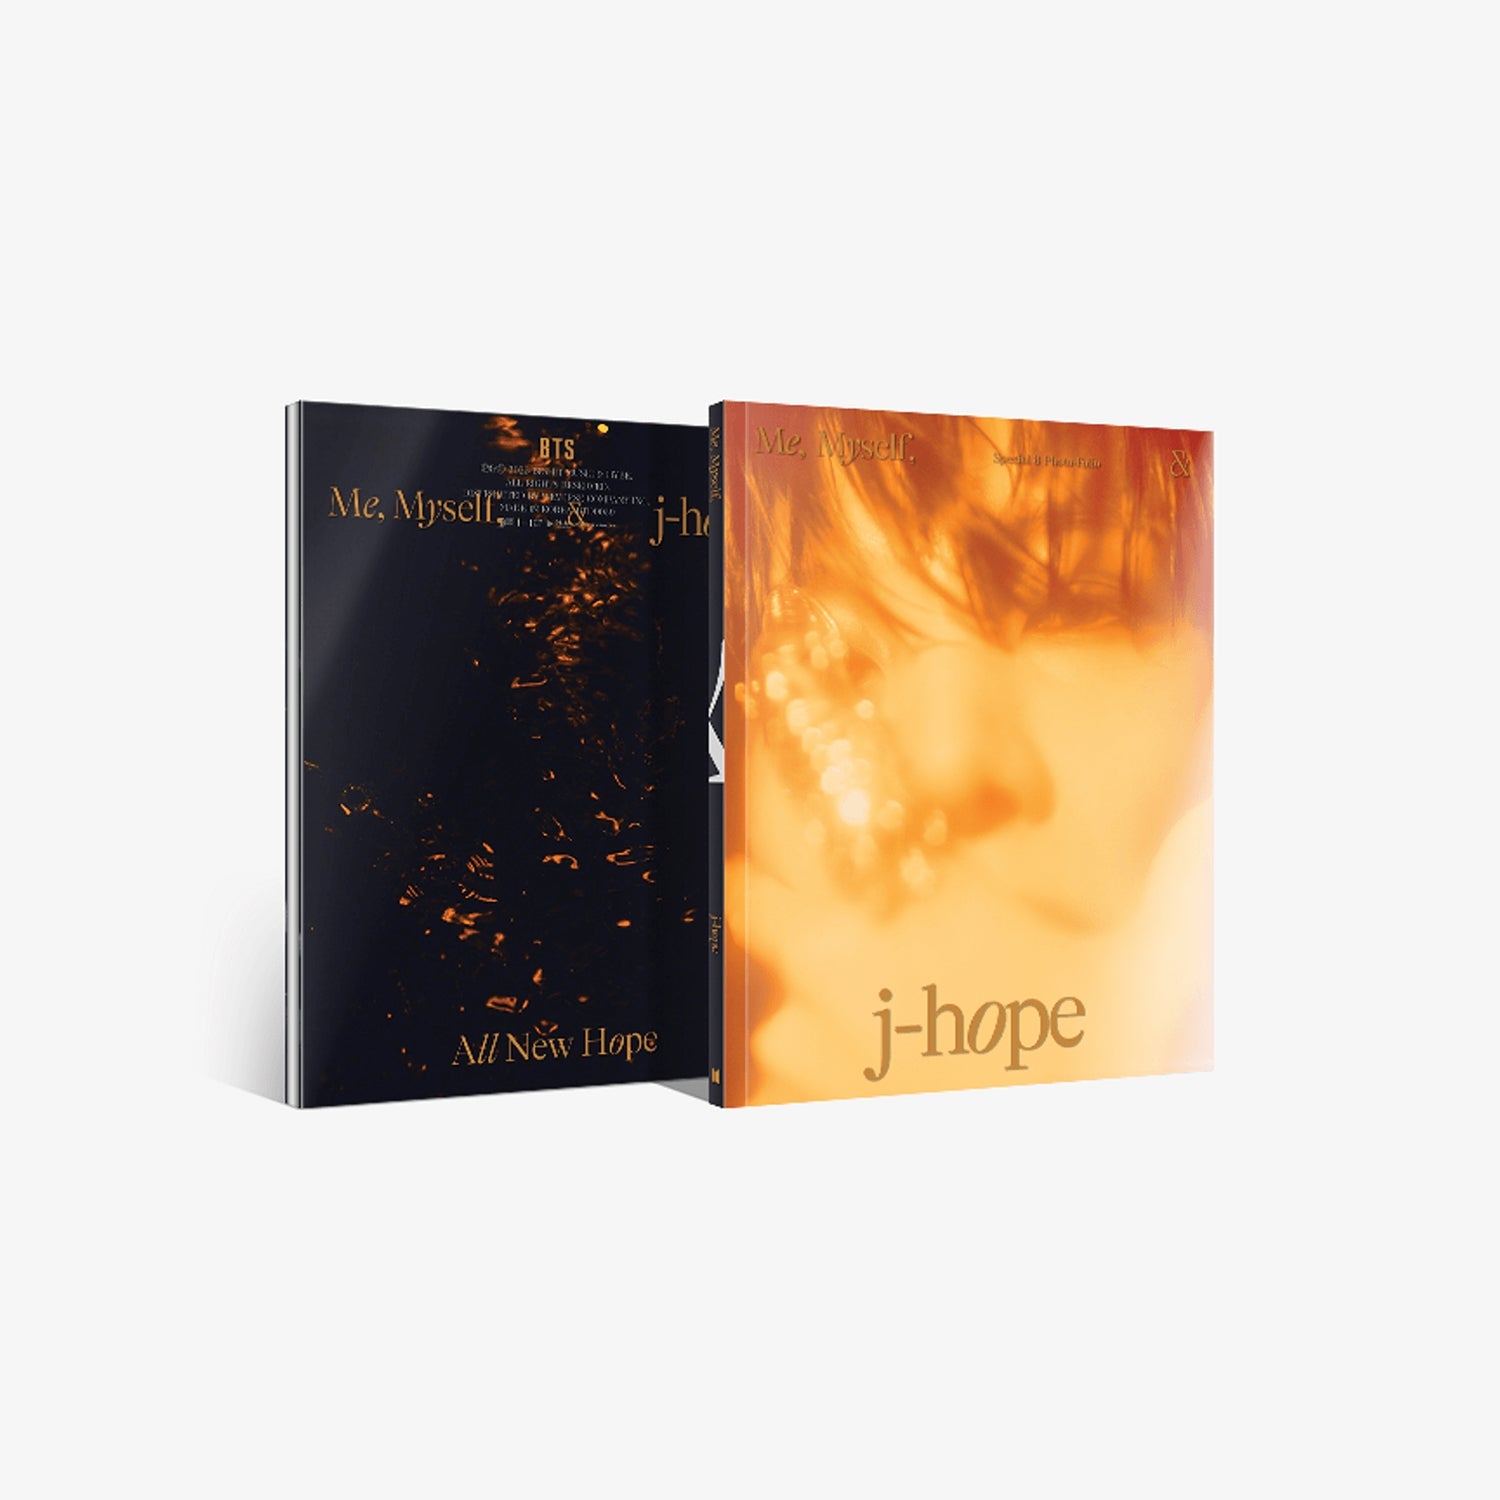 J-HOPE (BTS) SPECIAL 8 PHOTO-FOLIO ME, MYSELF, AND J-HOPE 'ALL NEW HOPE' COVER